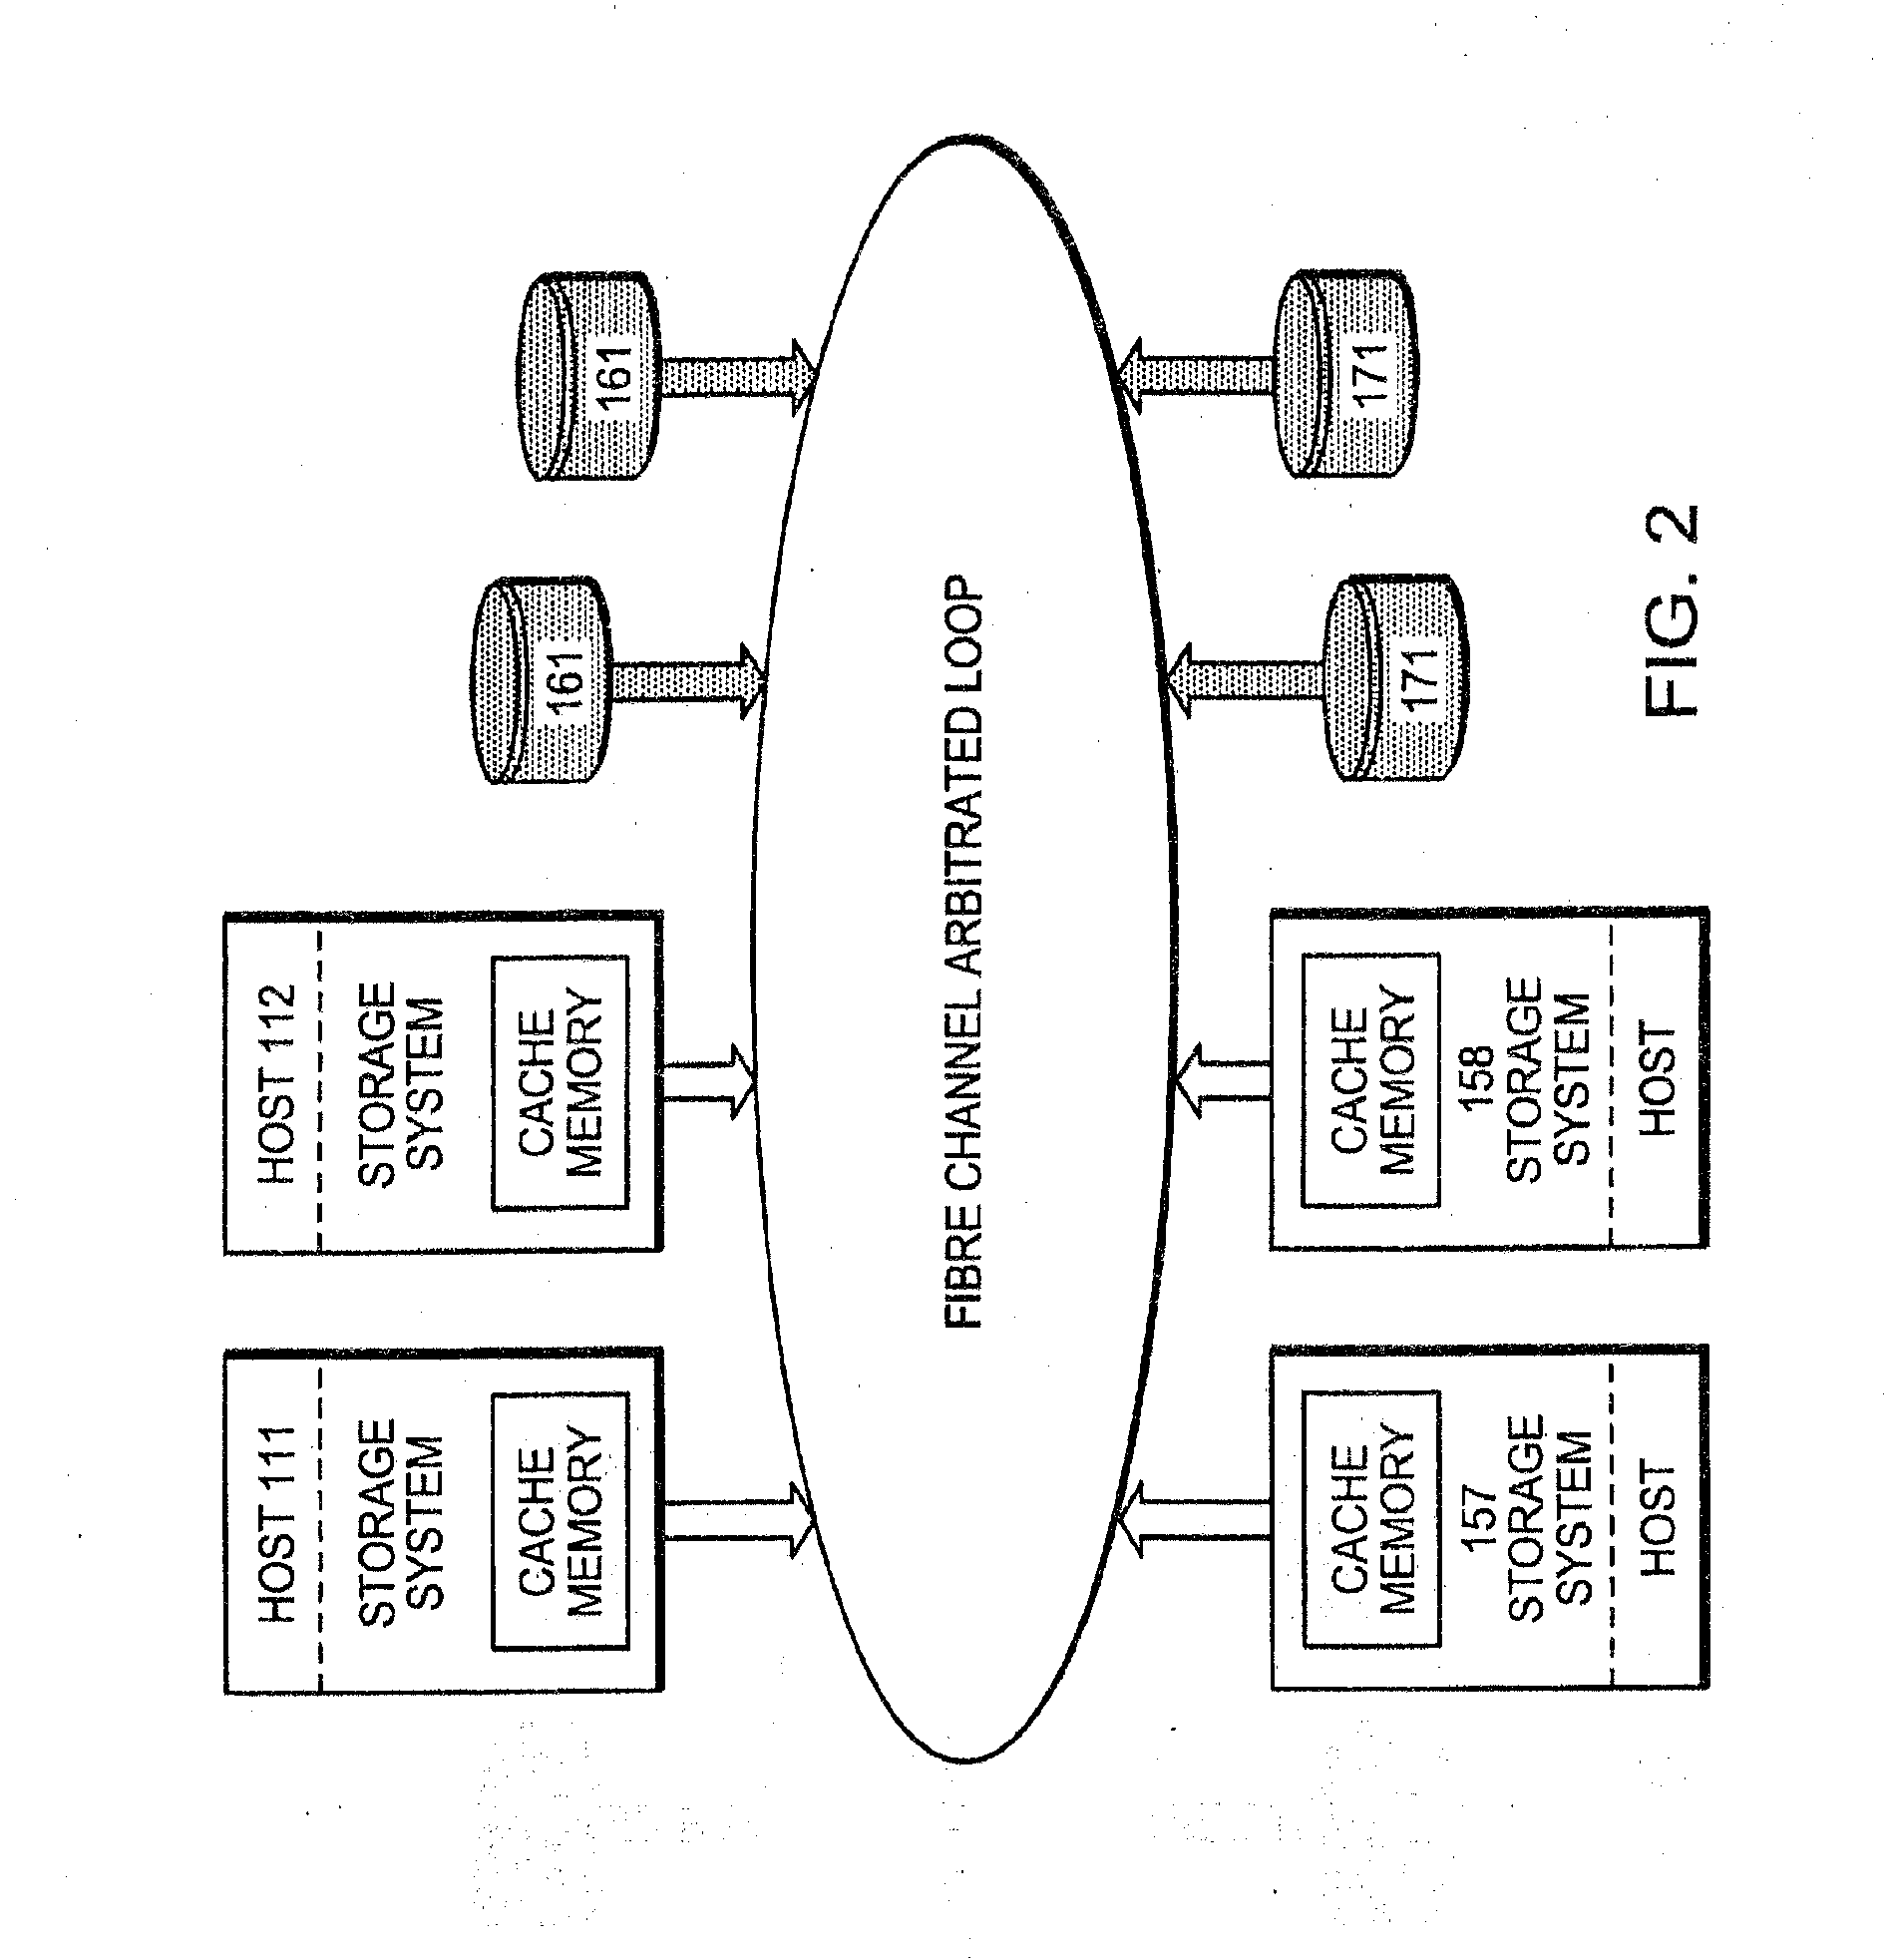 Data Storage and Data Sharing in a Network of Heterogeneous Computers